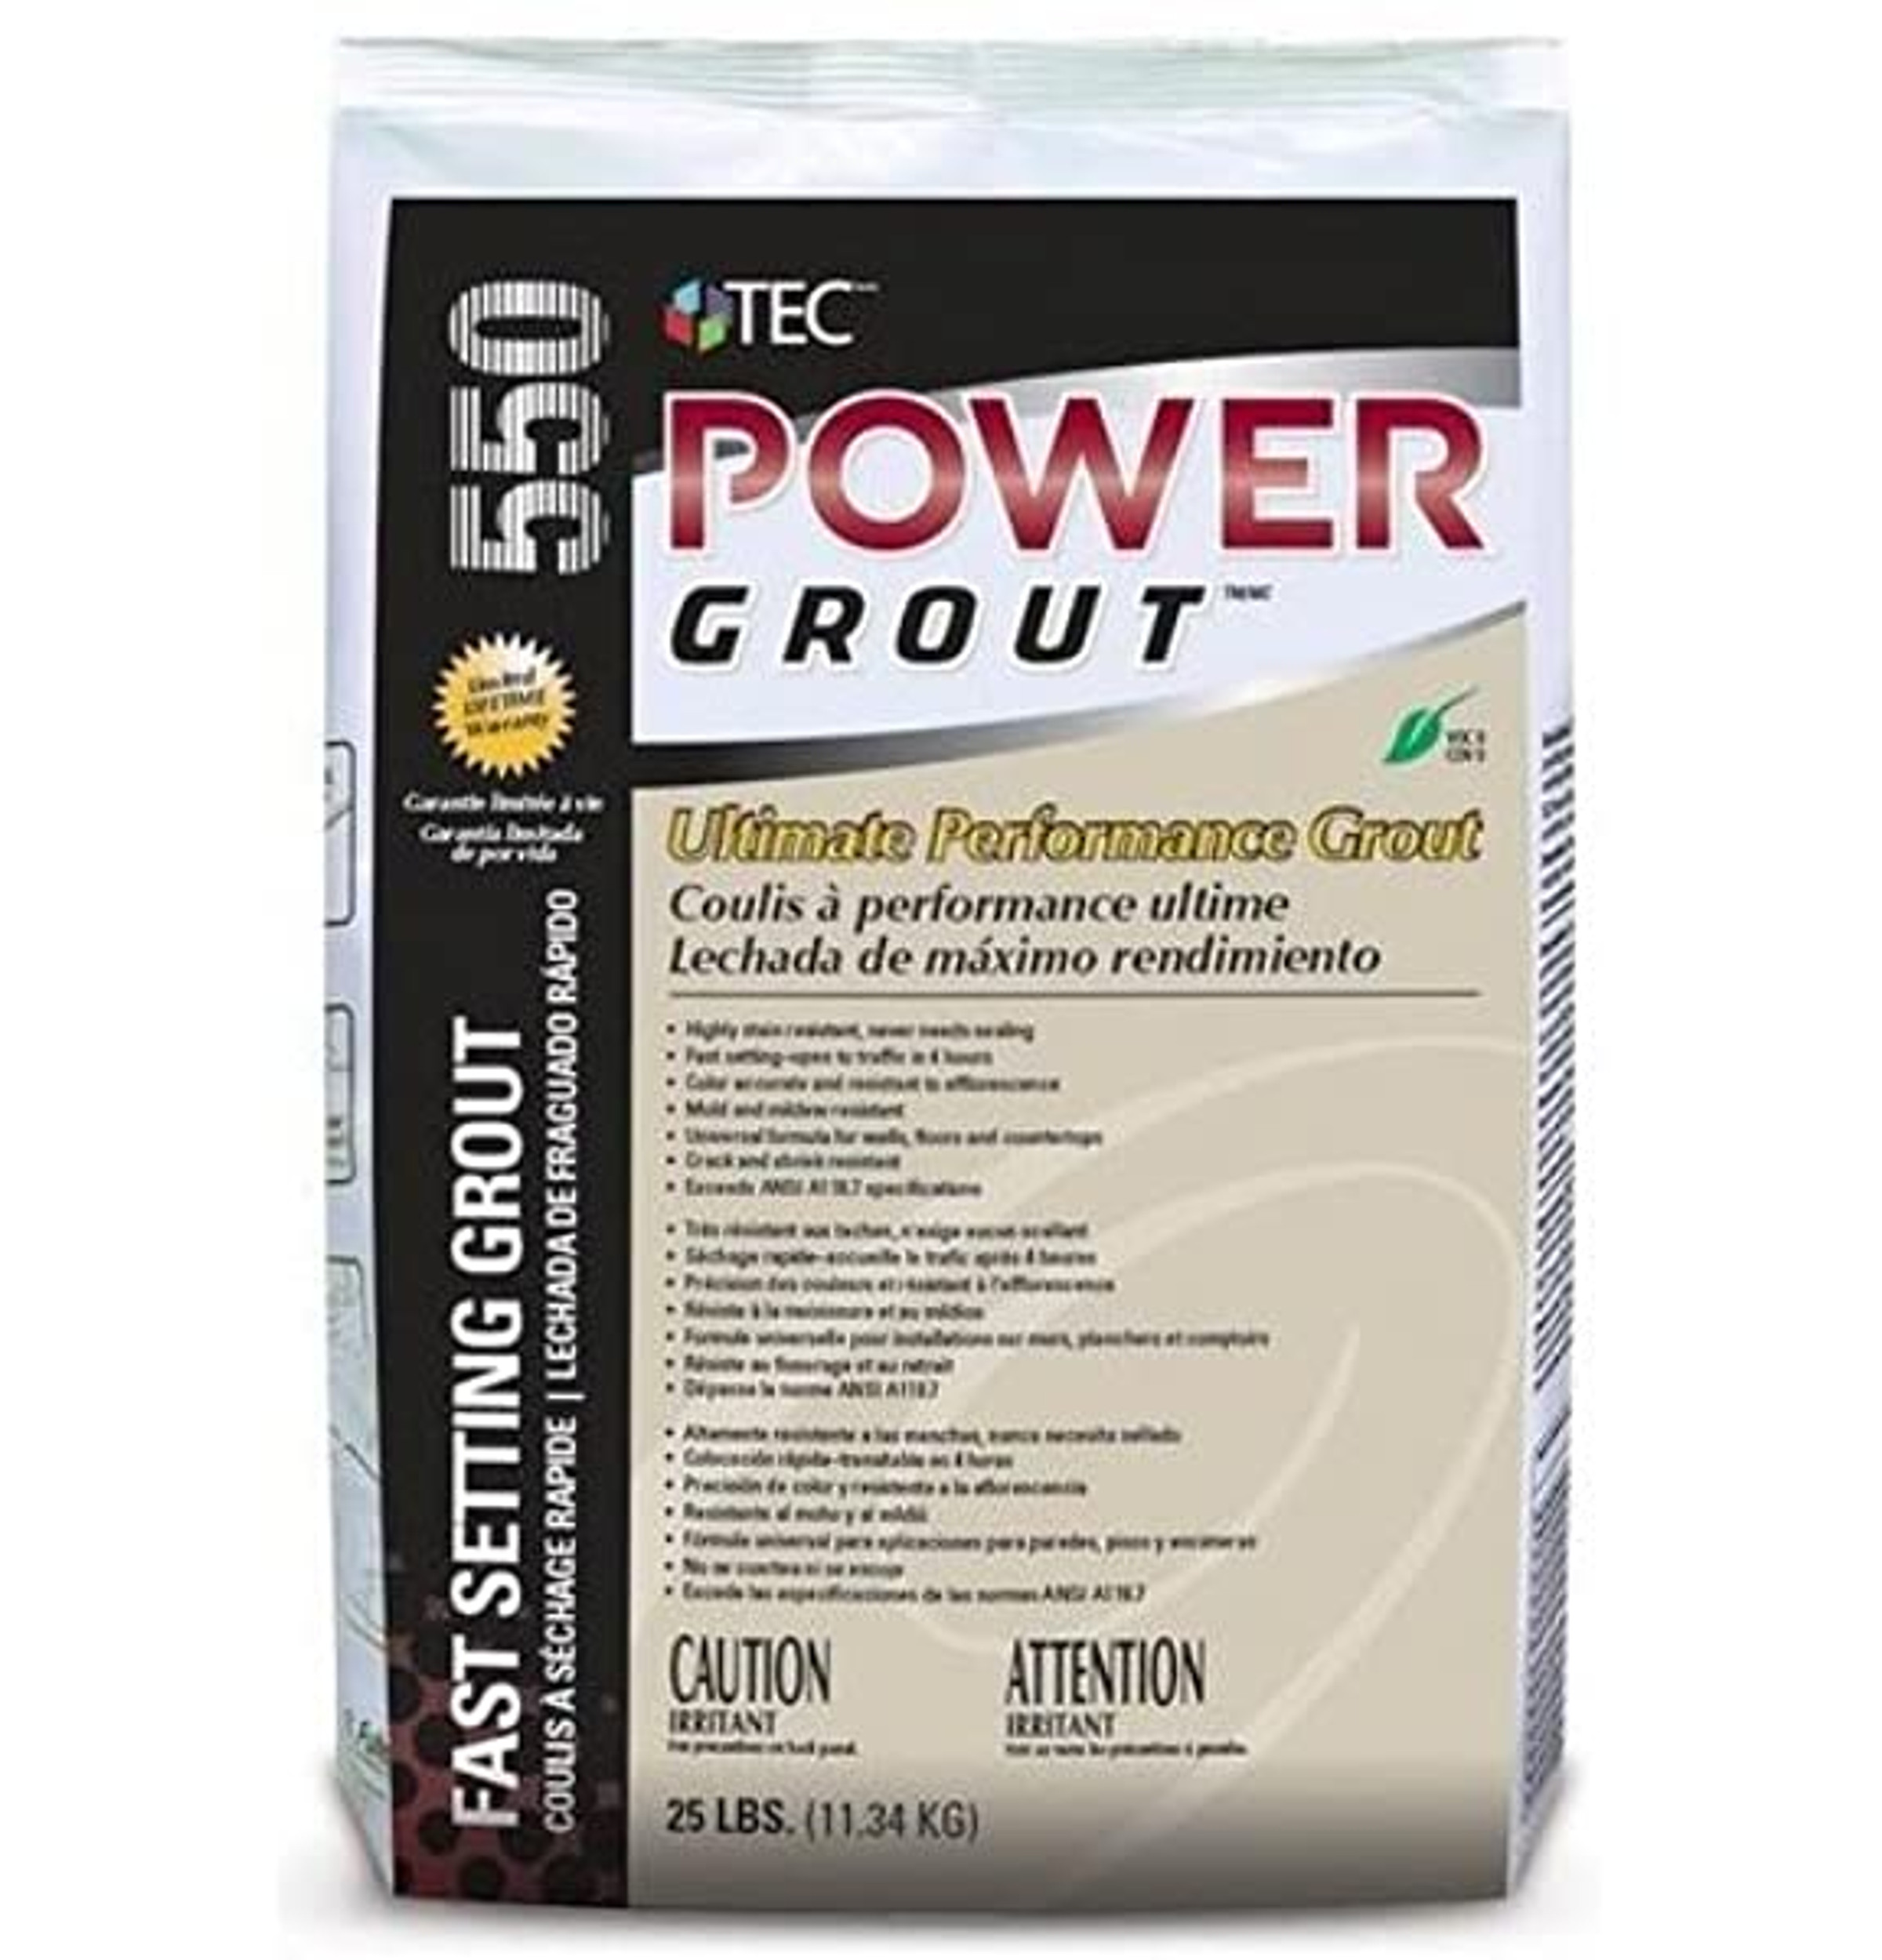 TEC Power Grout 550 Almond #984- 25 lbs Tec Power Grout